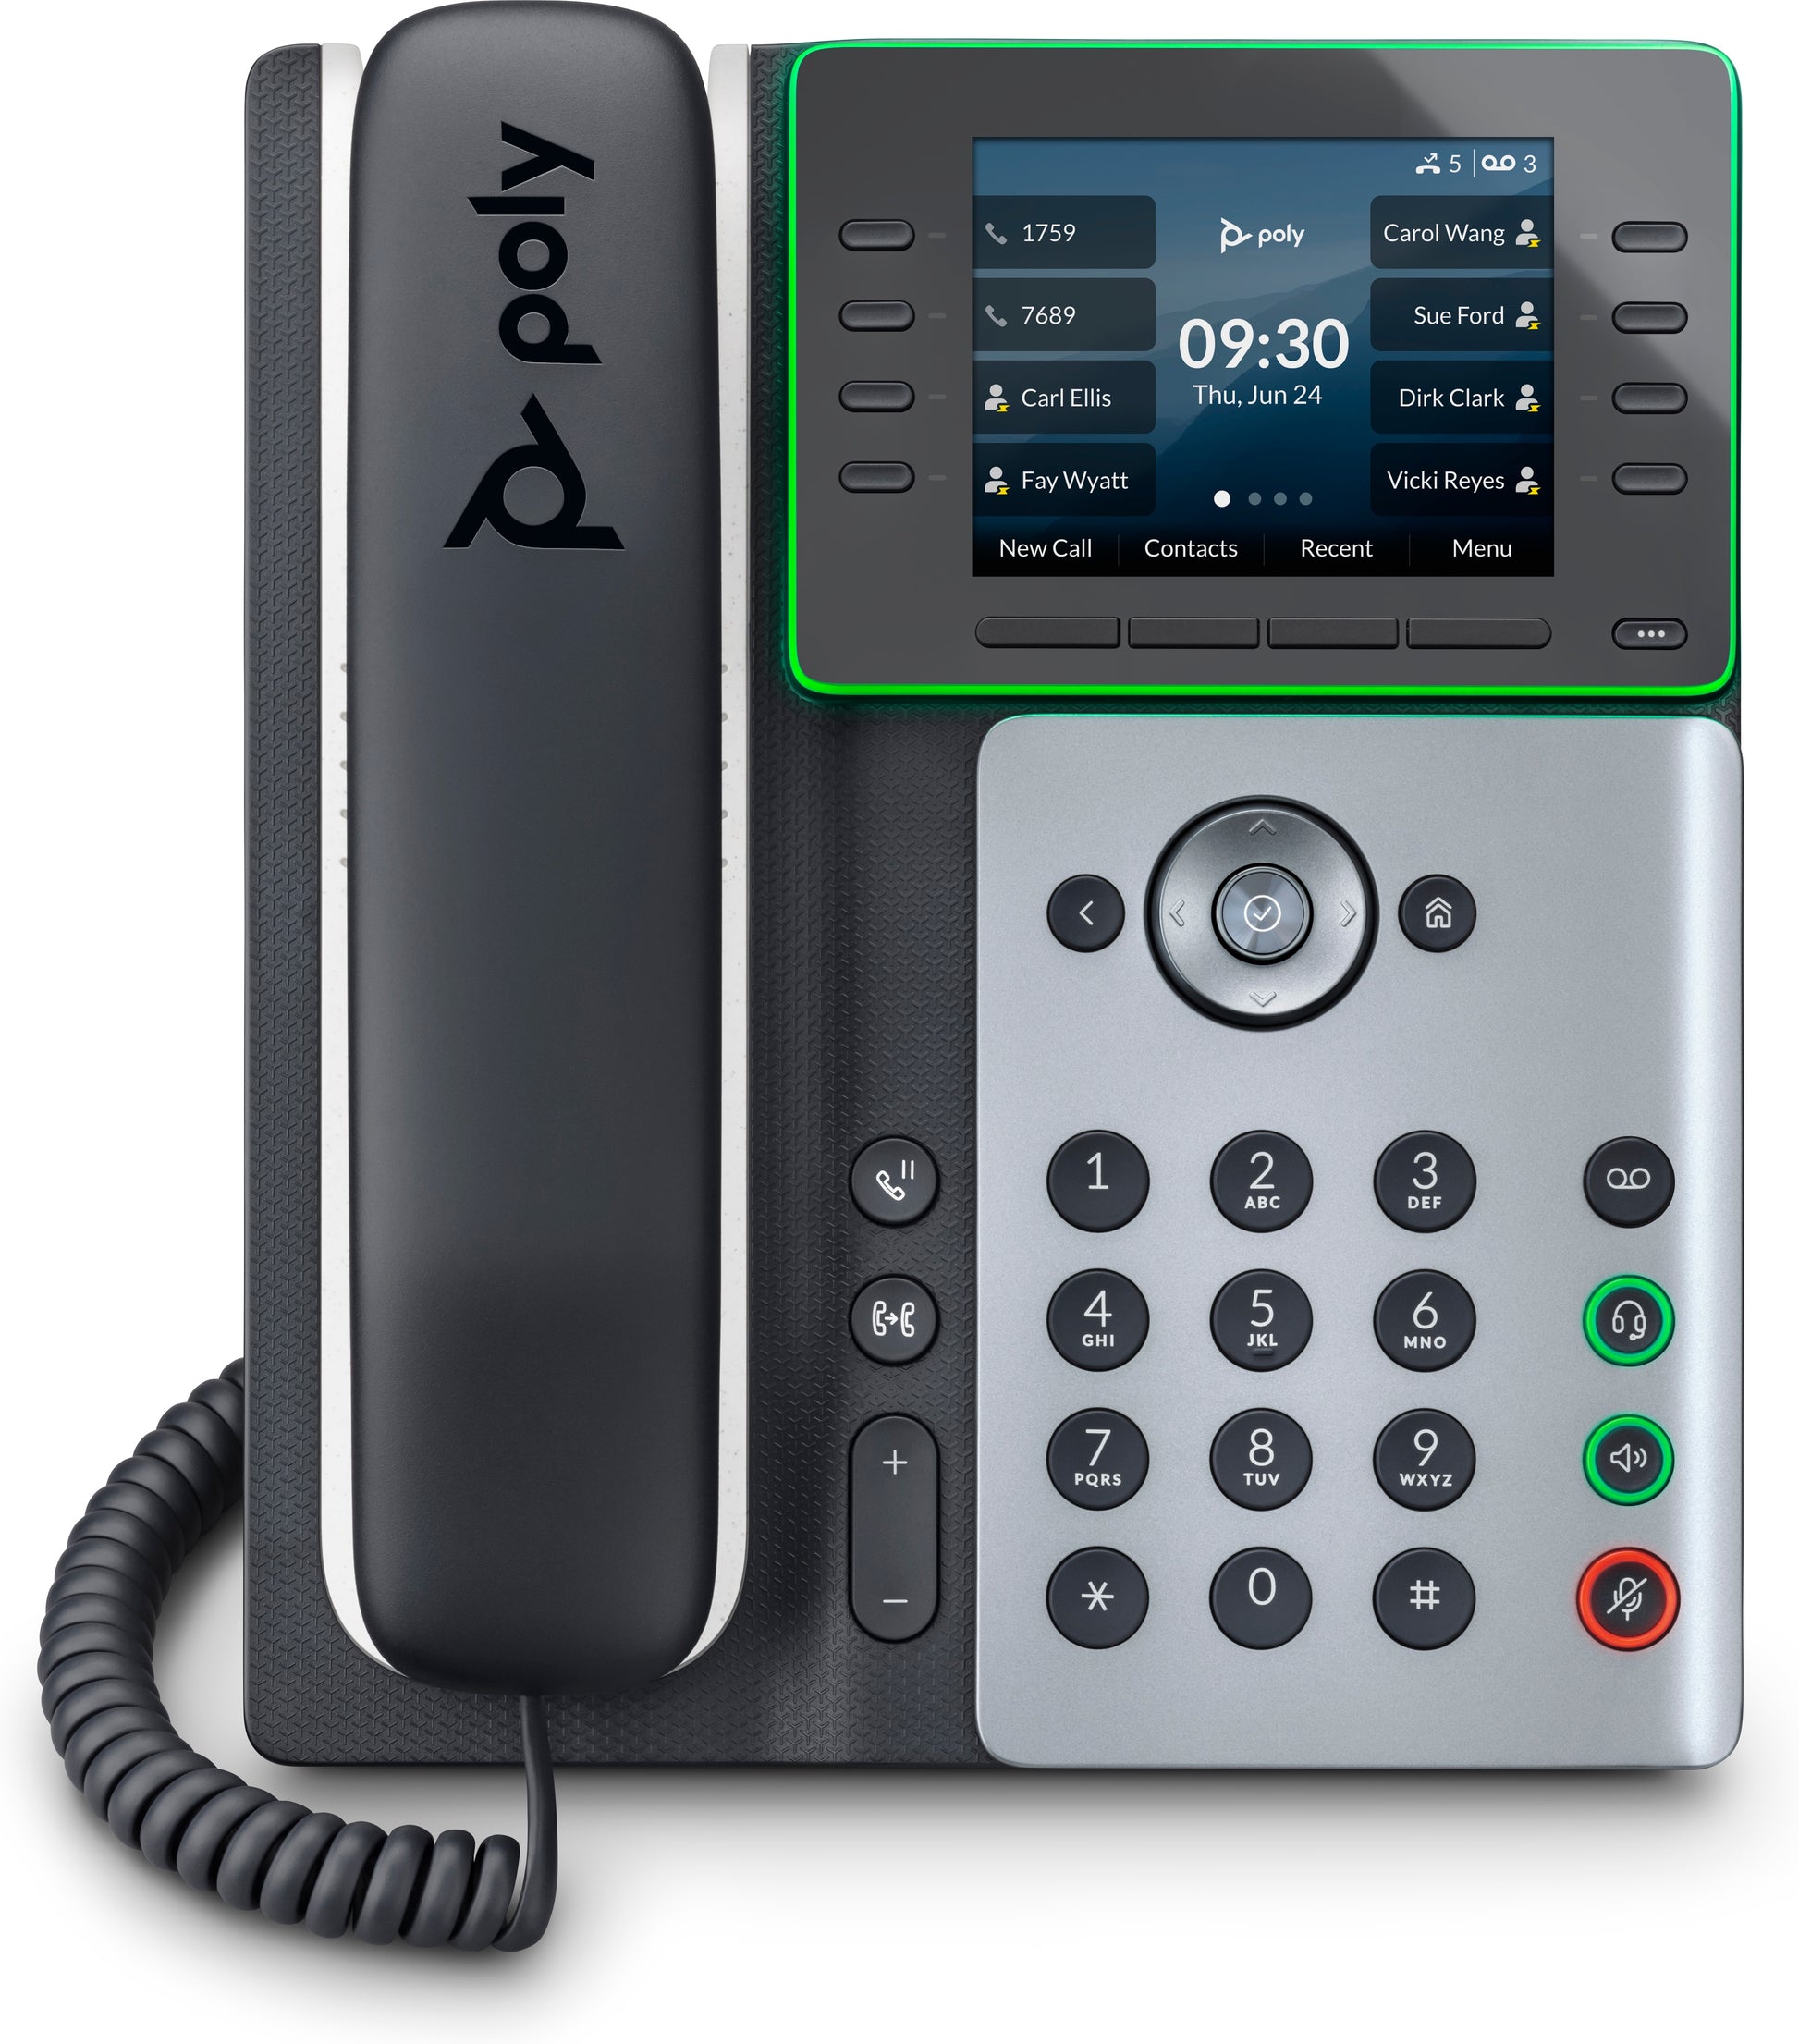 POLY Edge E350 IP Phone and PoE-enabled-0